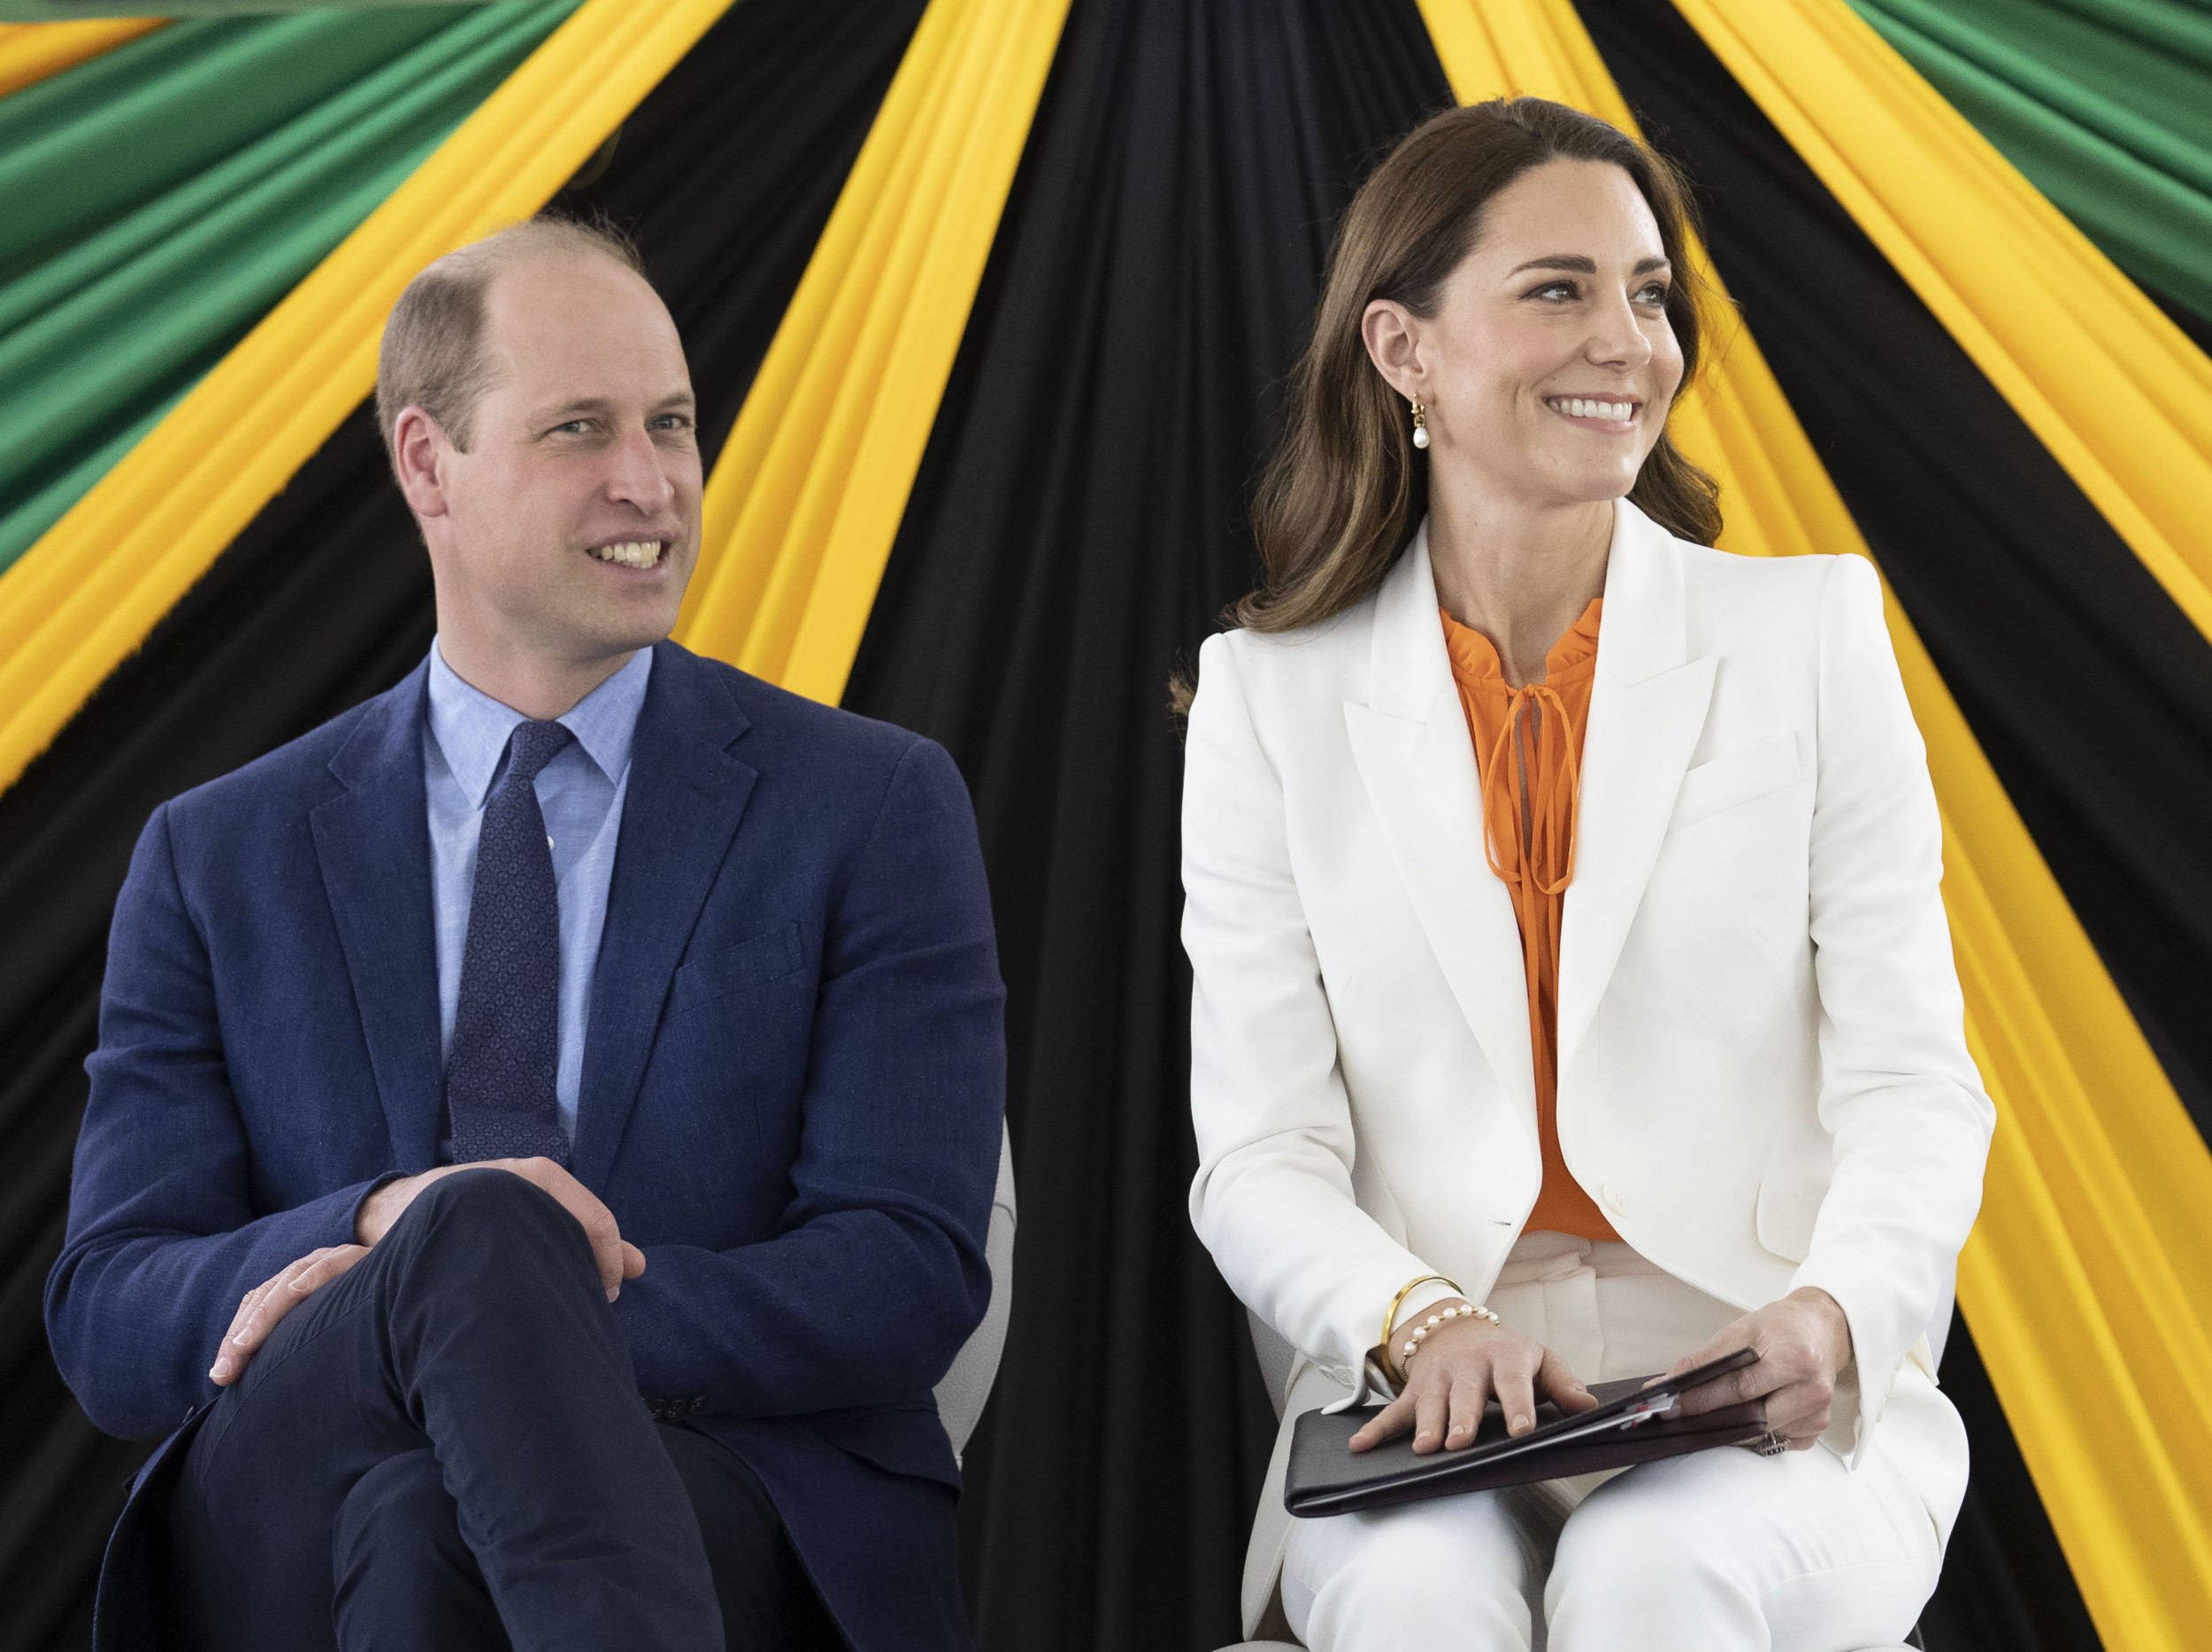 PeRspective: The Royal Tour of the Commonwealth